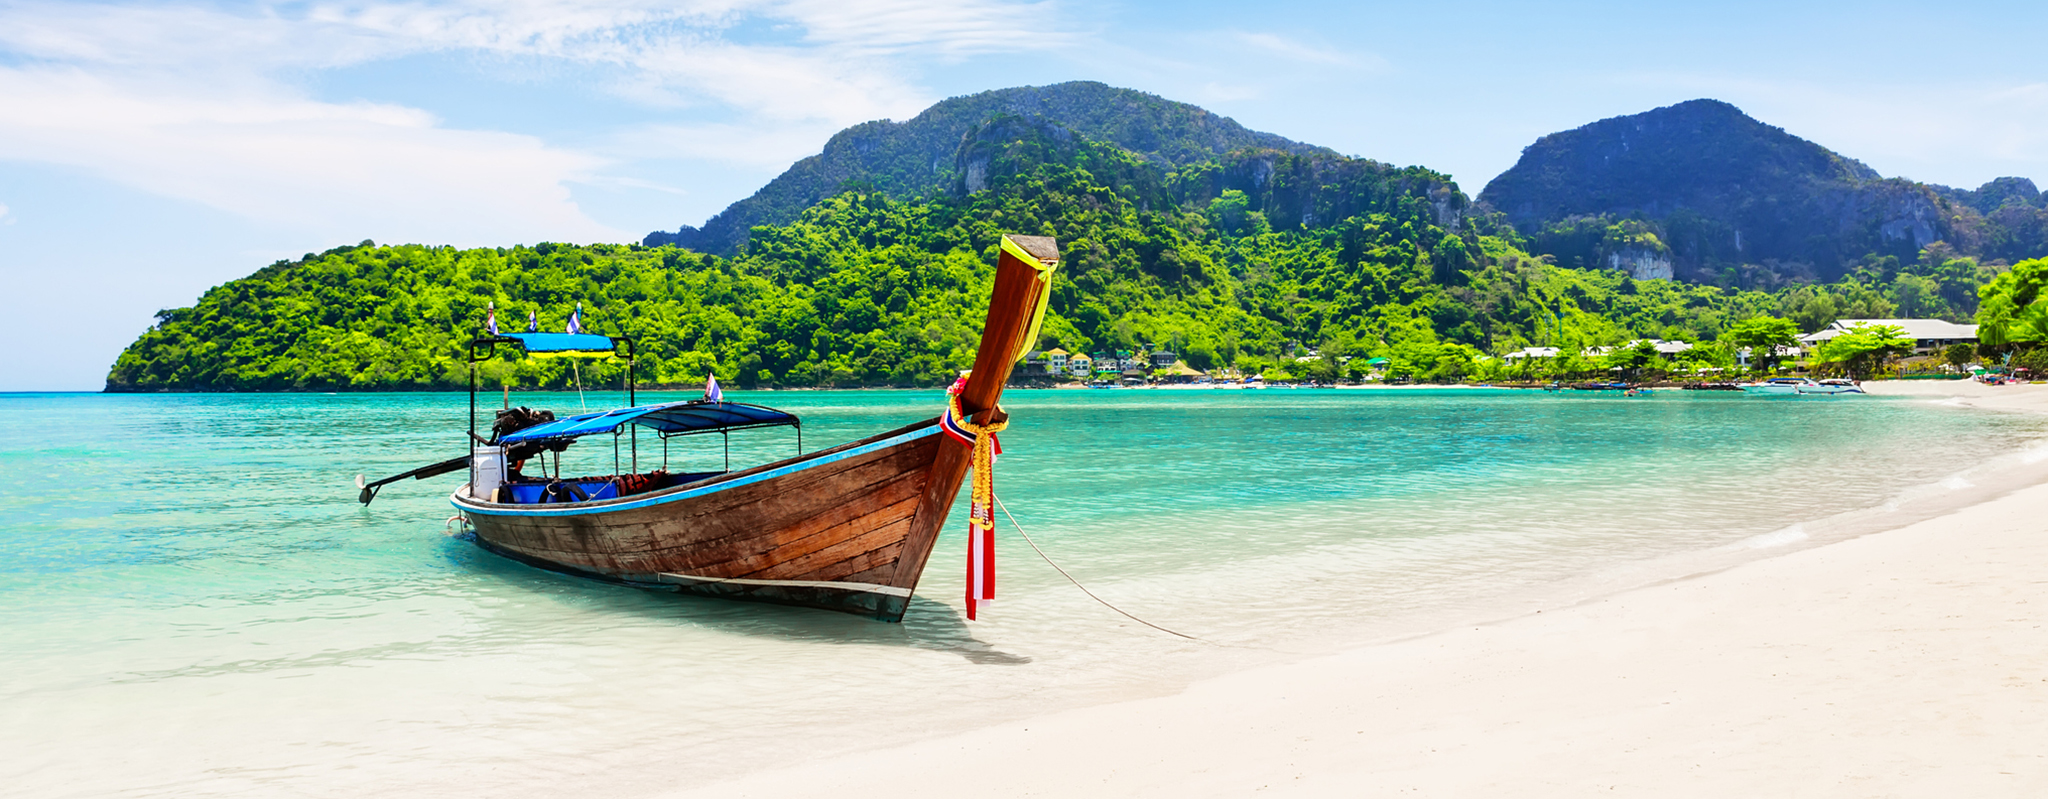 Boat on beautiful white sand in Koh Phi Phi with jungle-covered mountains in the background